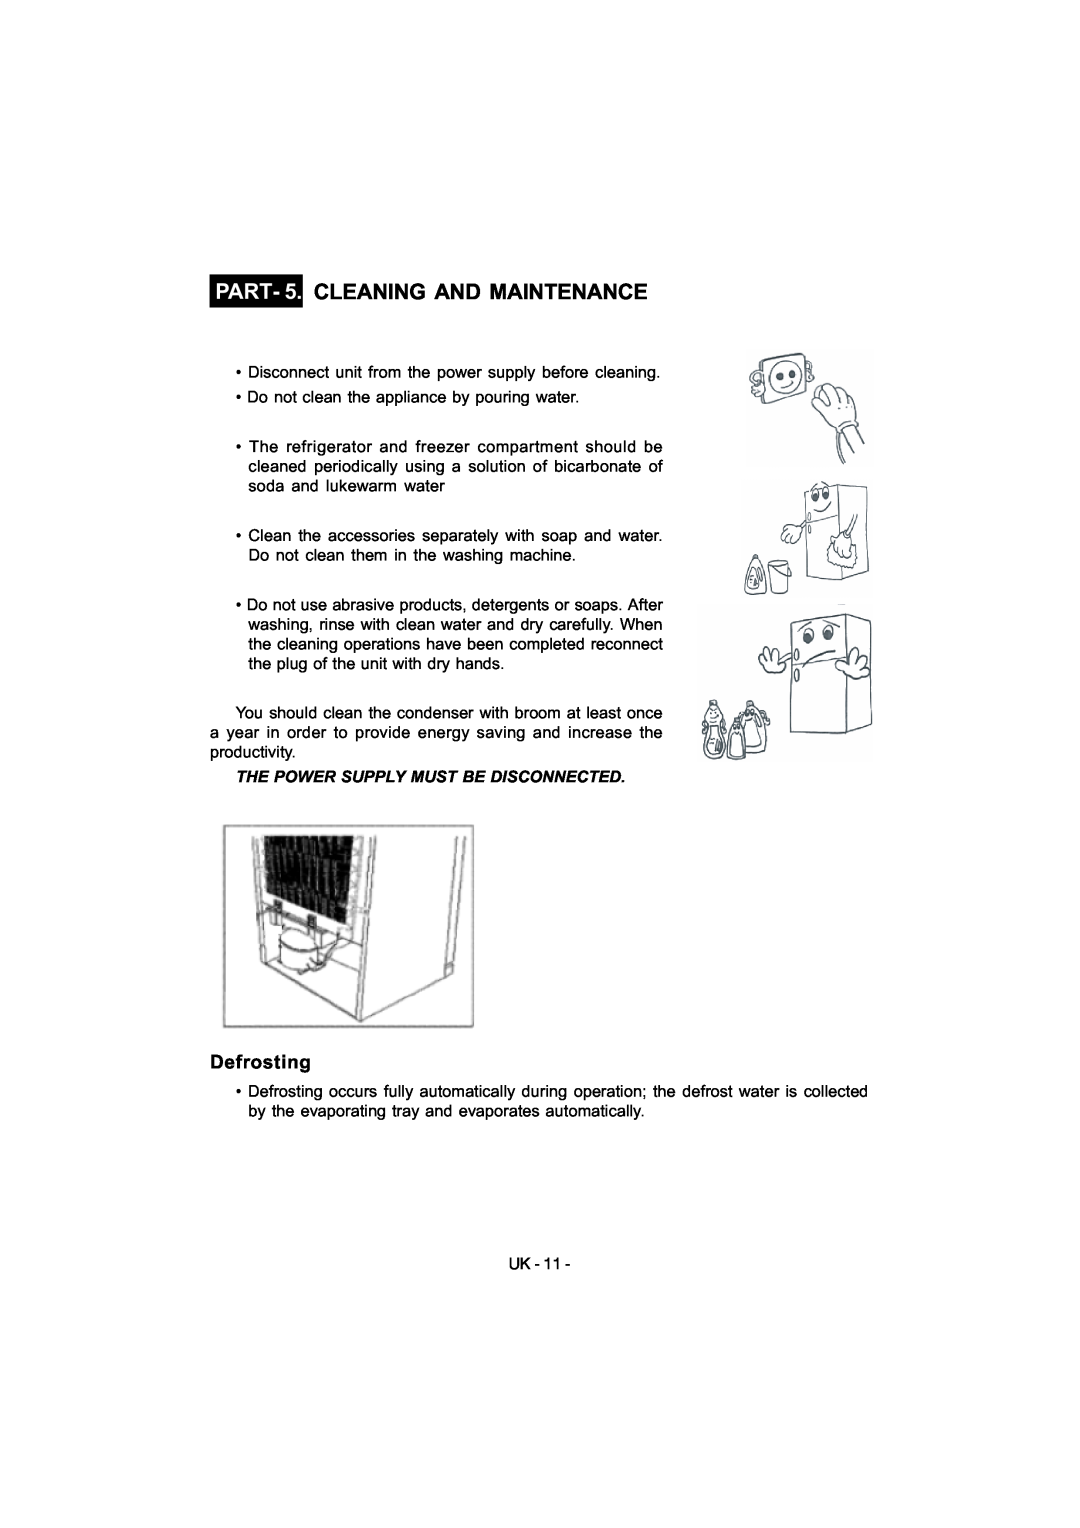 Smeg FD54APXNF manual PART- 5. CLEANING AND MAINTENANCE, Defrosting 